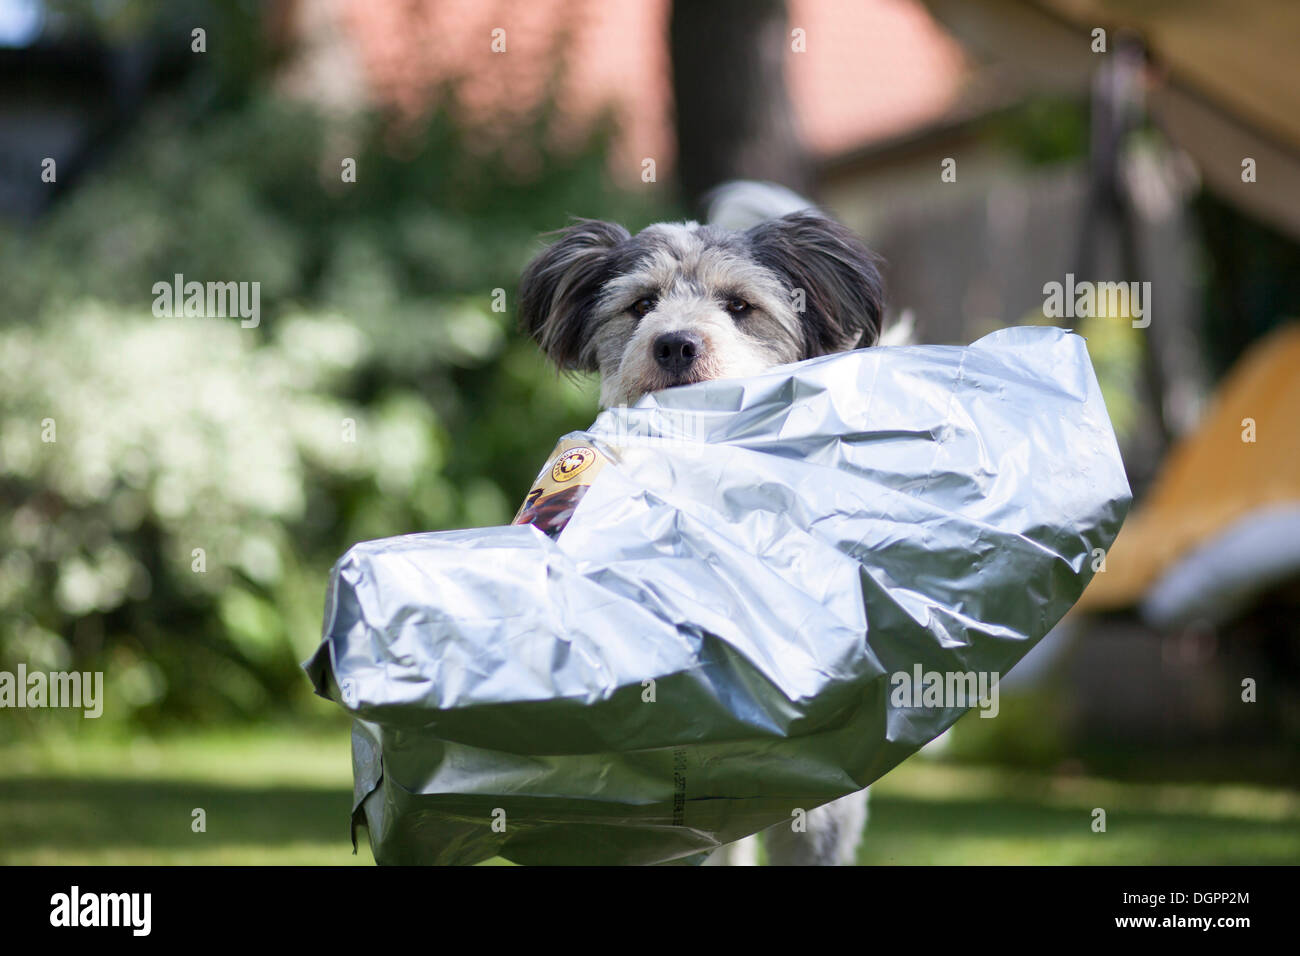 Mixed-breed dog carrying an empty feed bag in its mouth Stock Photo